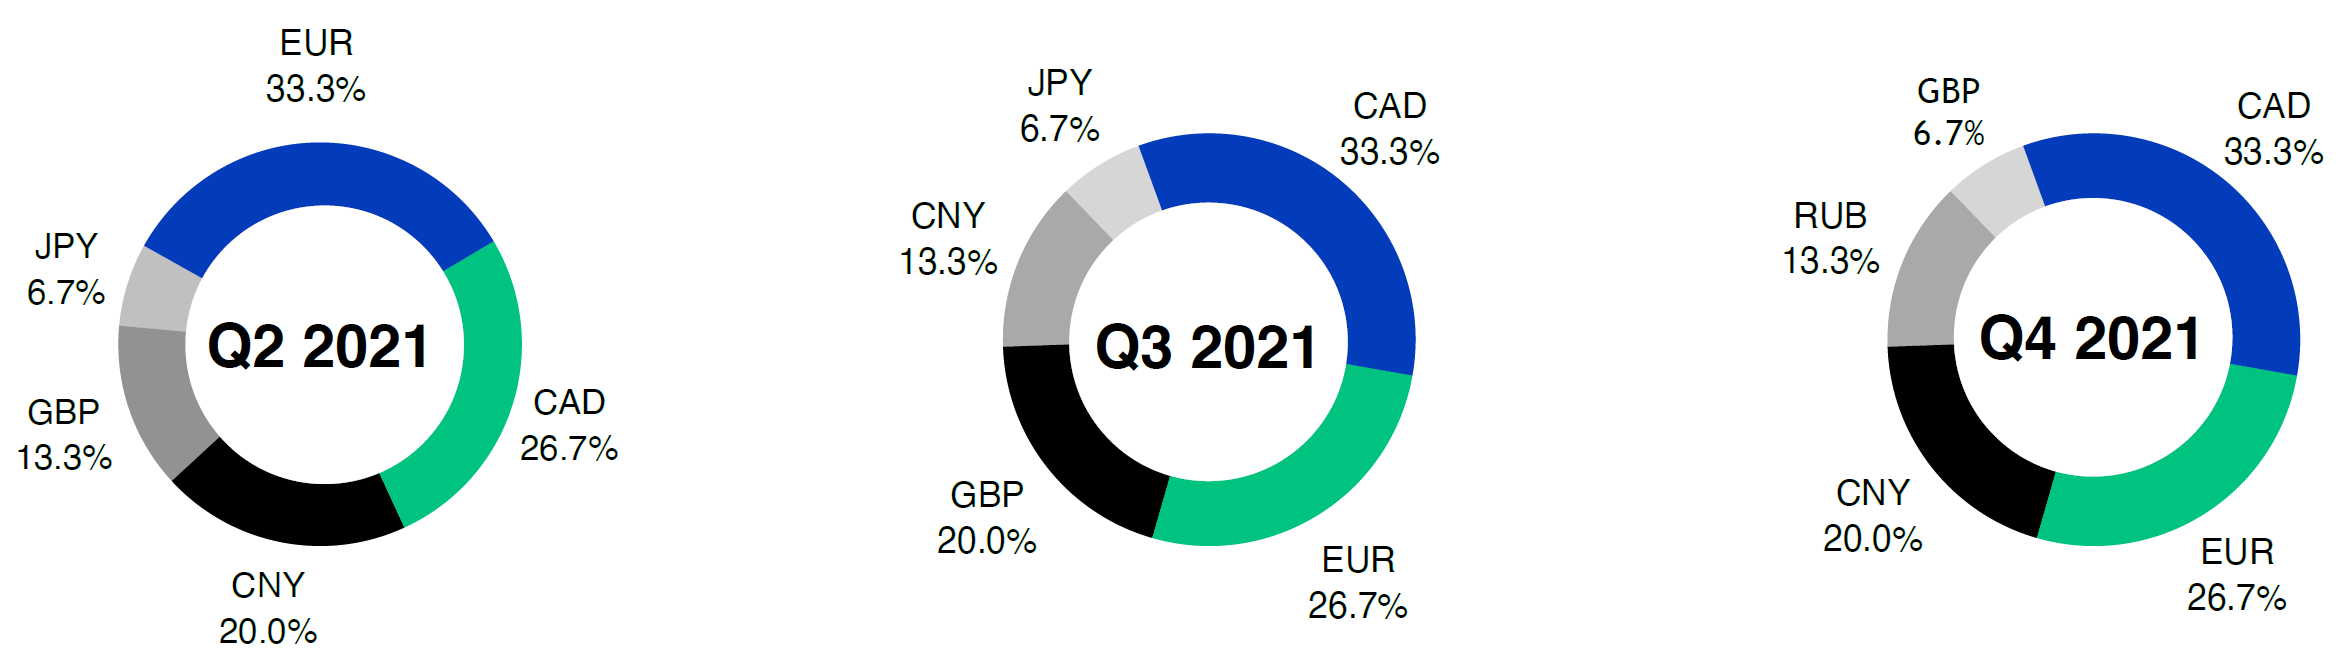 Top Currencies Referenced by North American Companies as Impactful Q2-4 2021